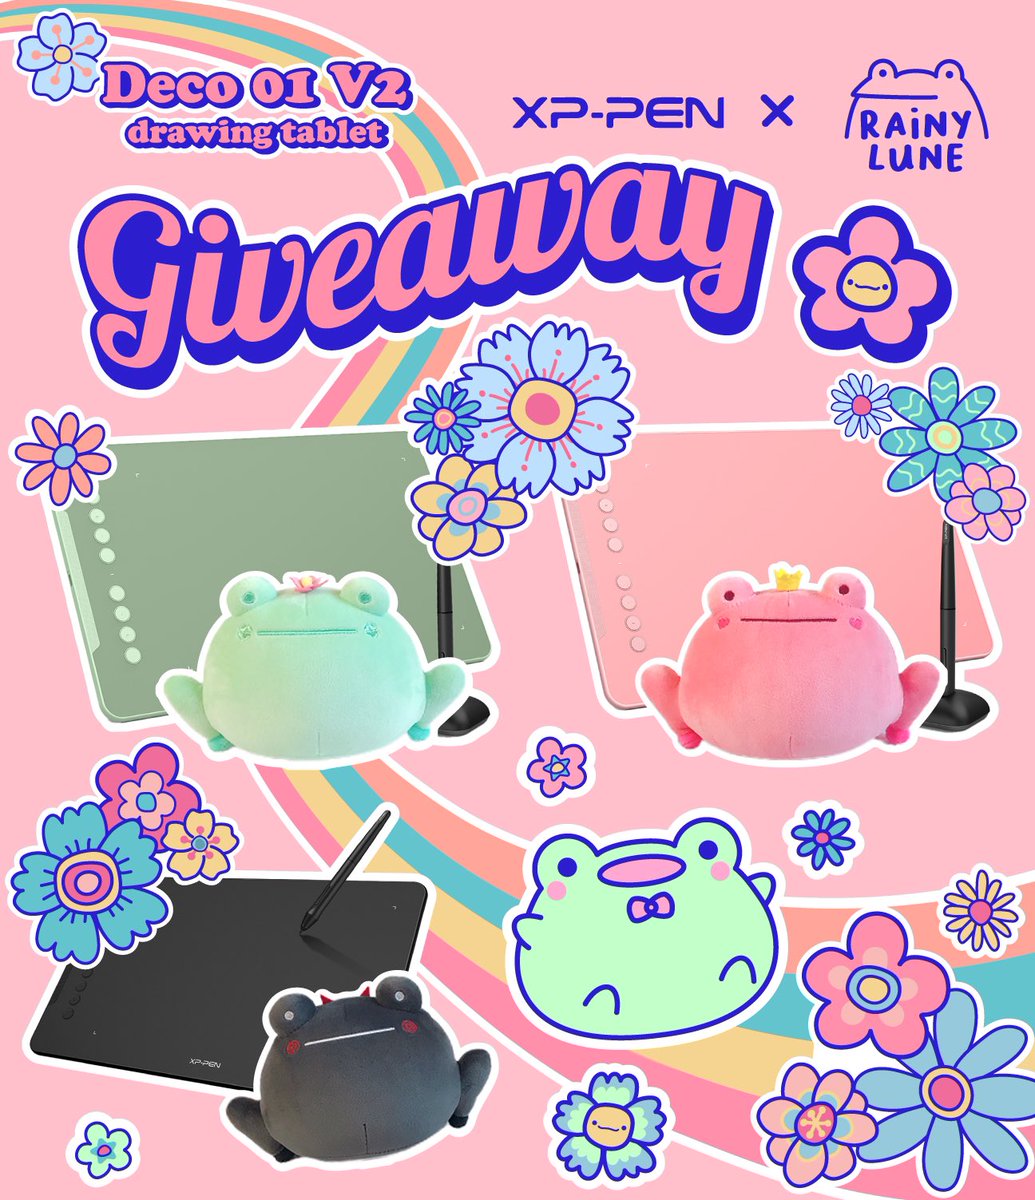 i’m doing a joint giveaway with XPPen!! we’re giving away drawing tablets & frogs to 3 lucky winners!! 🐸
HOW TO ENTER:
🌸 Retweet this post 
🌸 Follow me & @xppenca